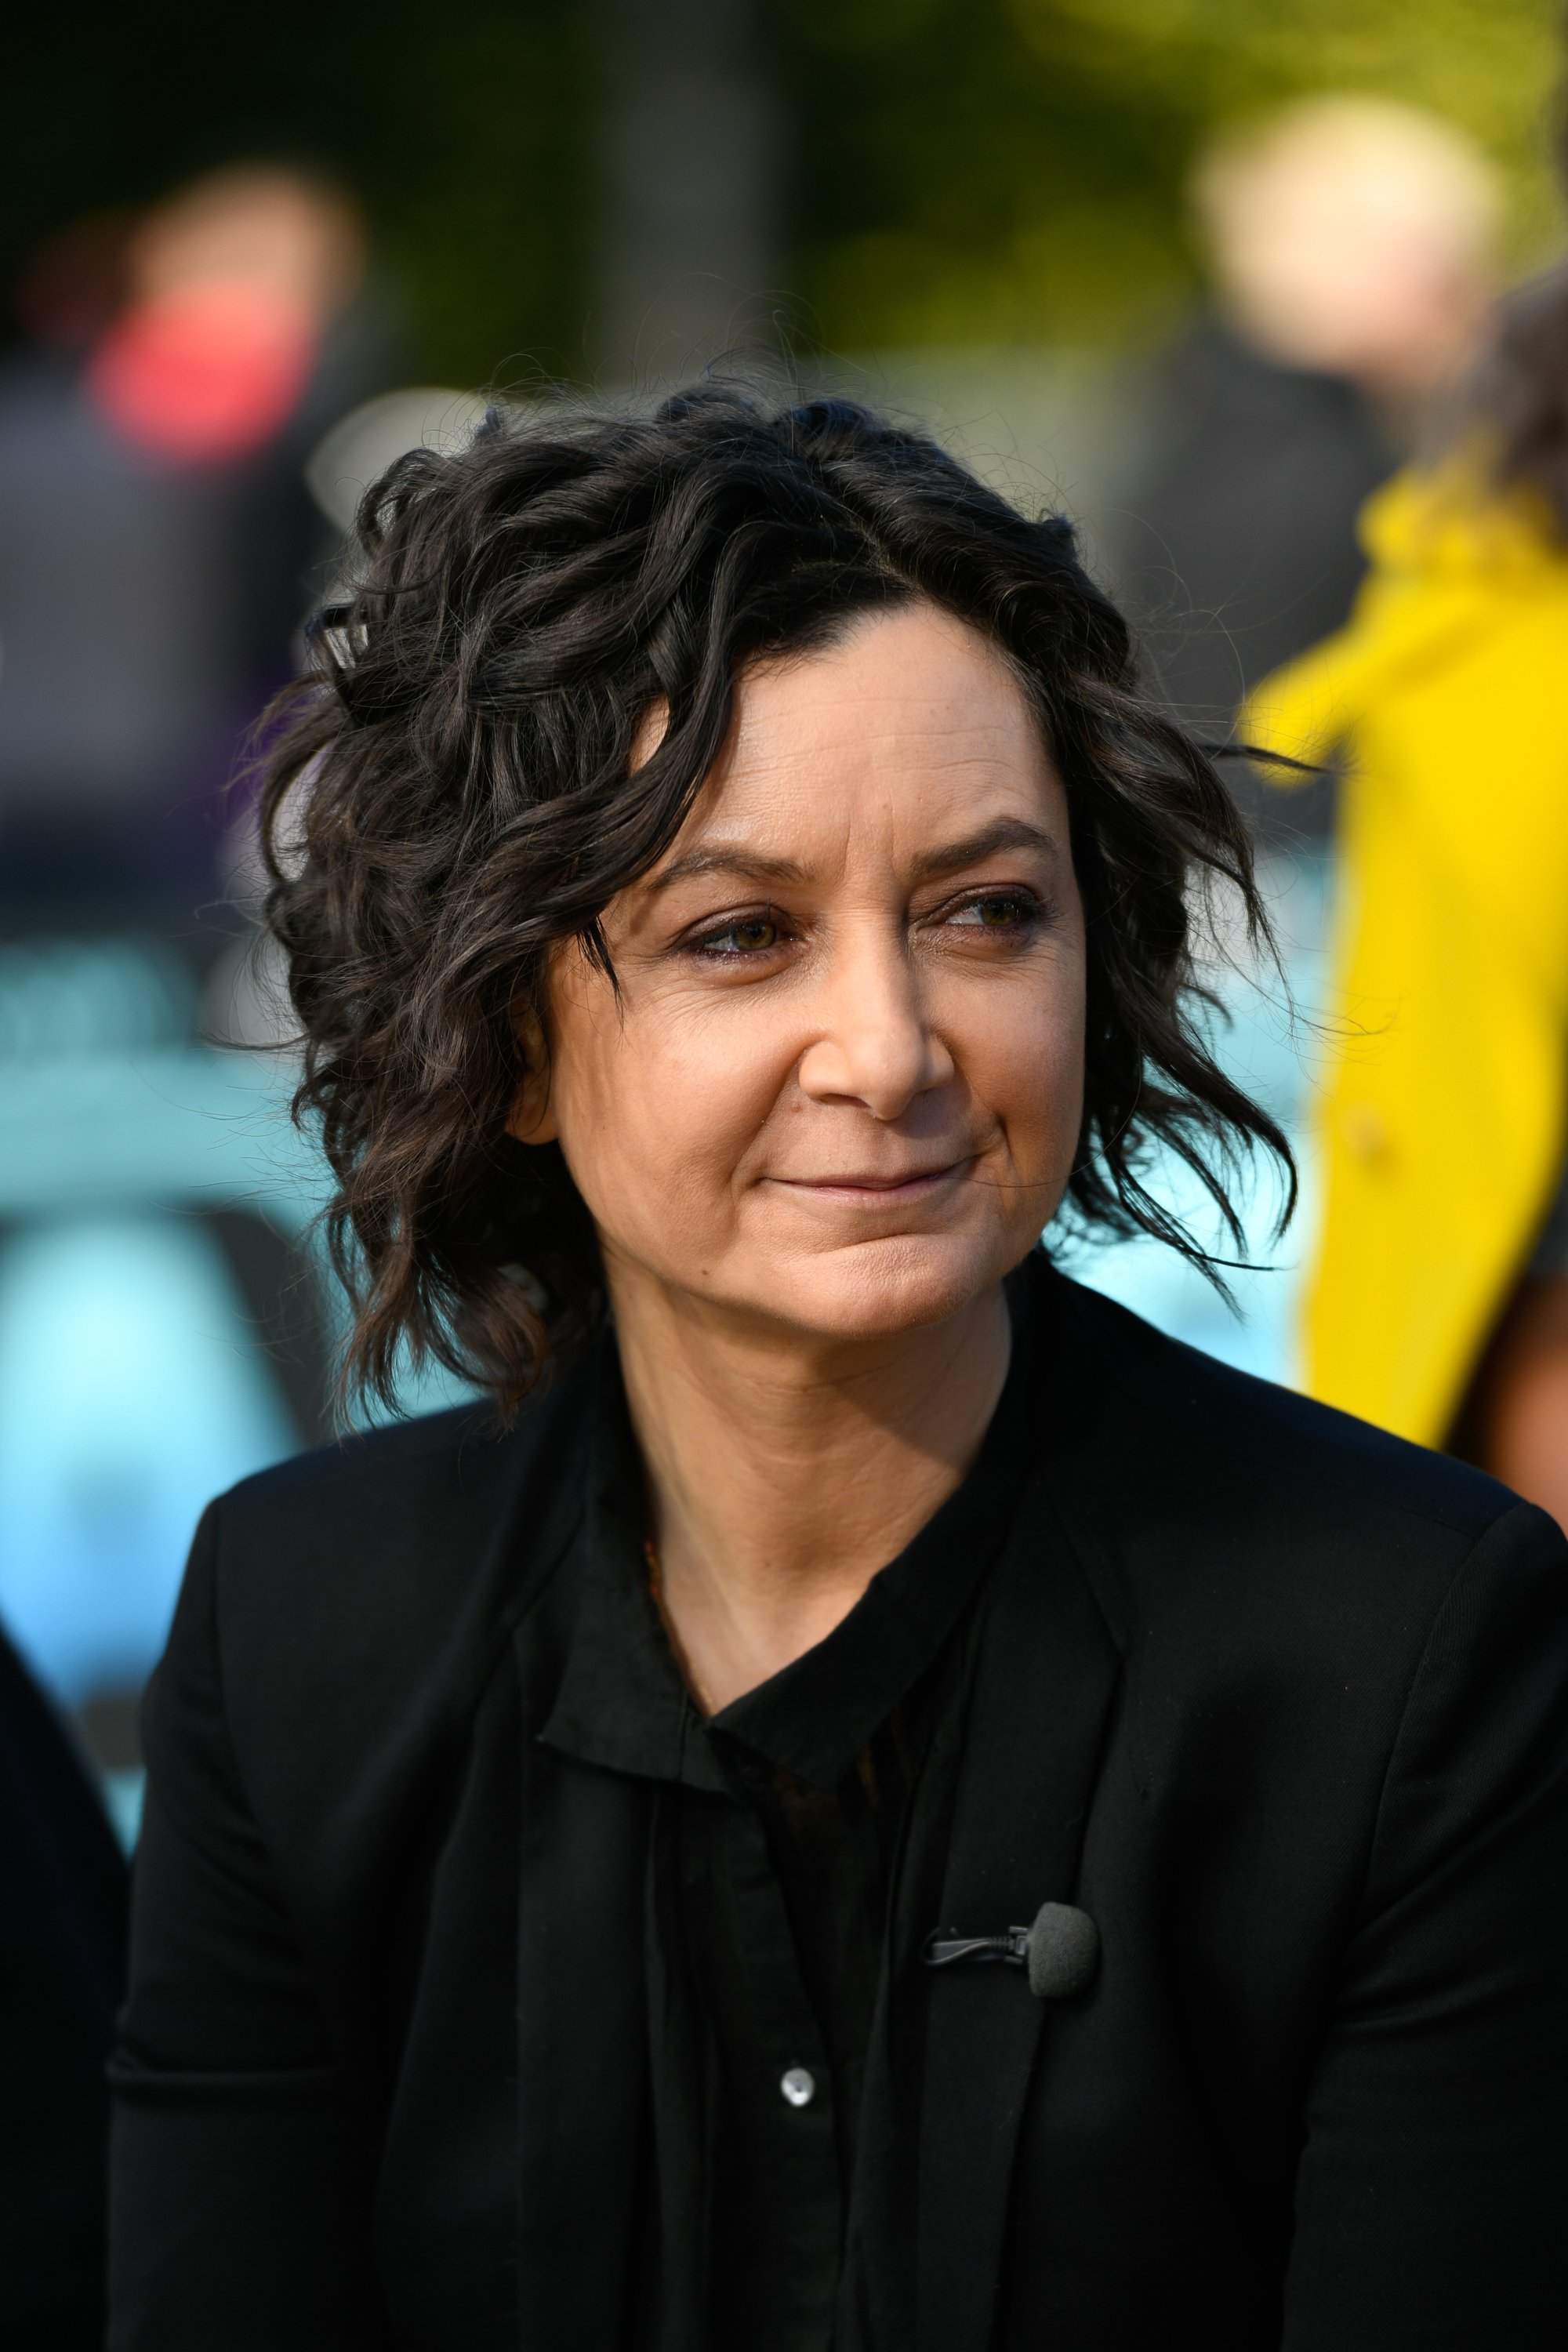 Sara Gilbert visits "Extra" in Universal City, California on February 19, 2019 | Photo: Getty Images